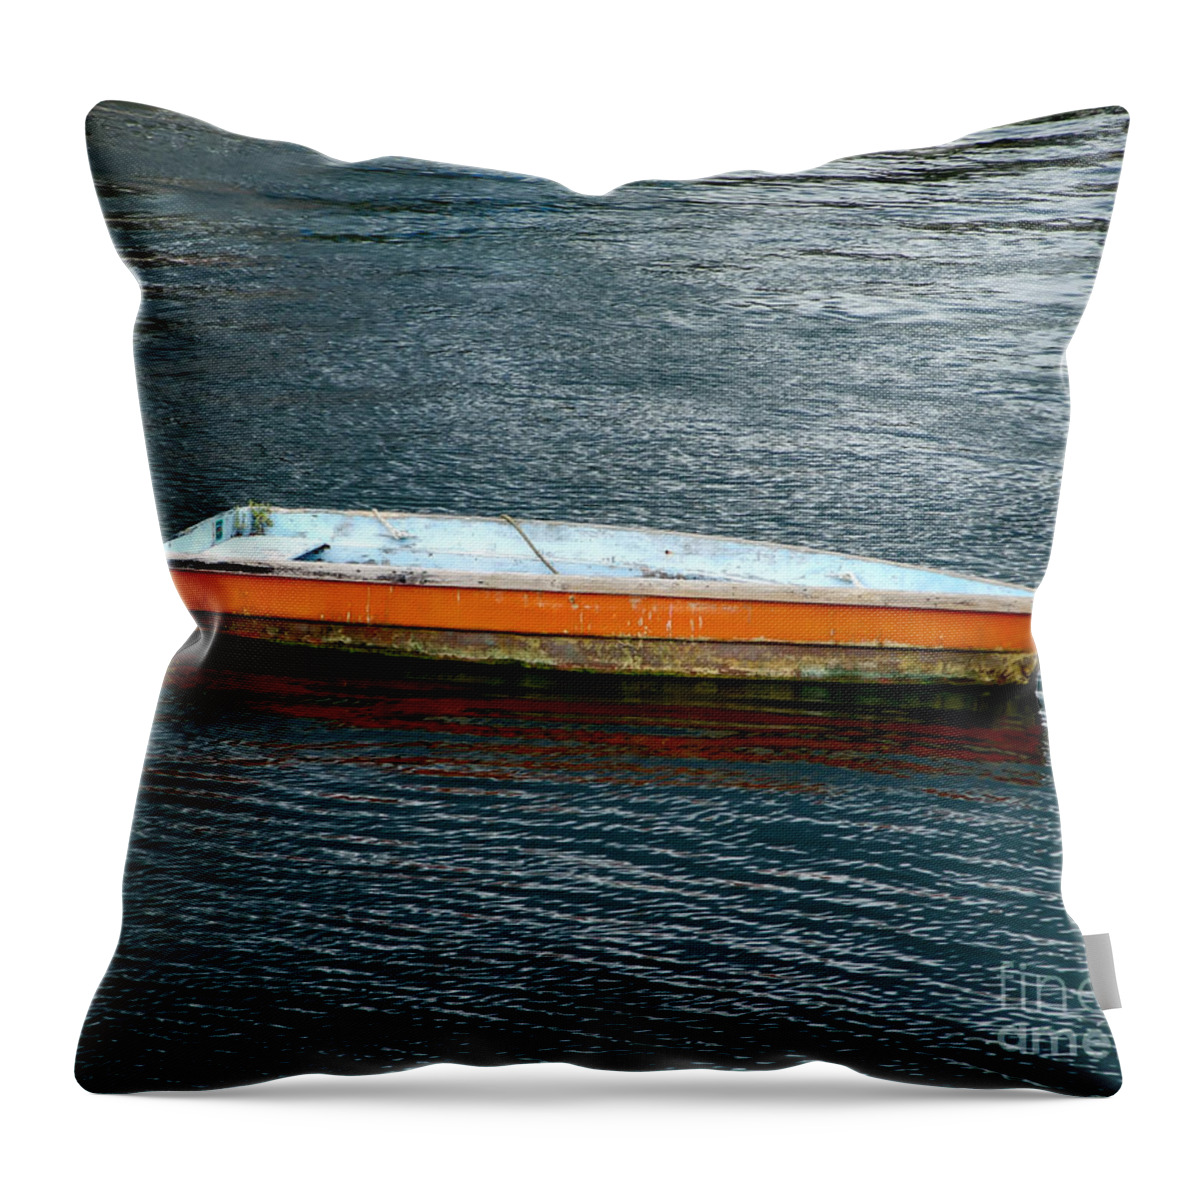 Artoffoxvox Throw Pillow featuring the photograph Lonely Skiff by Kristen Fox